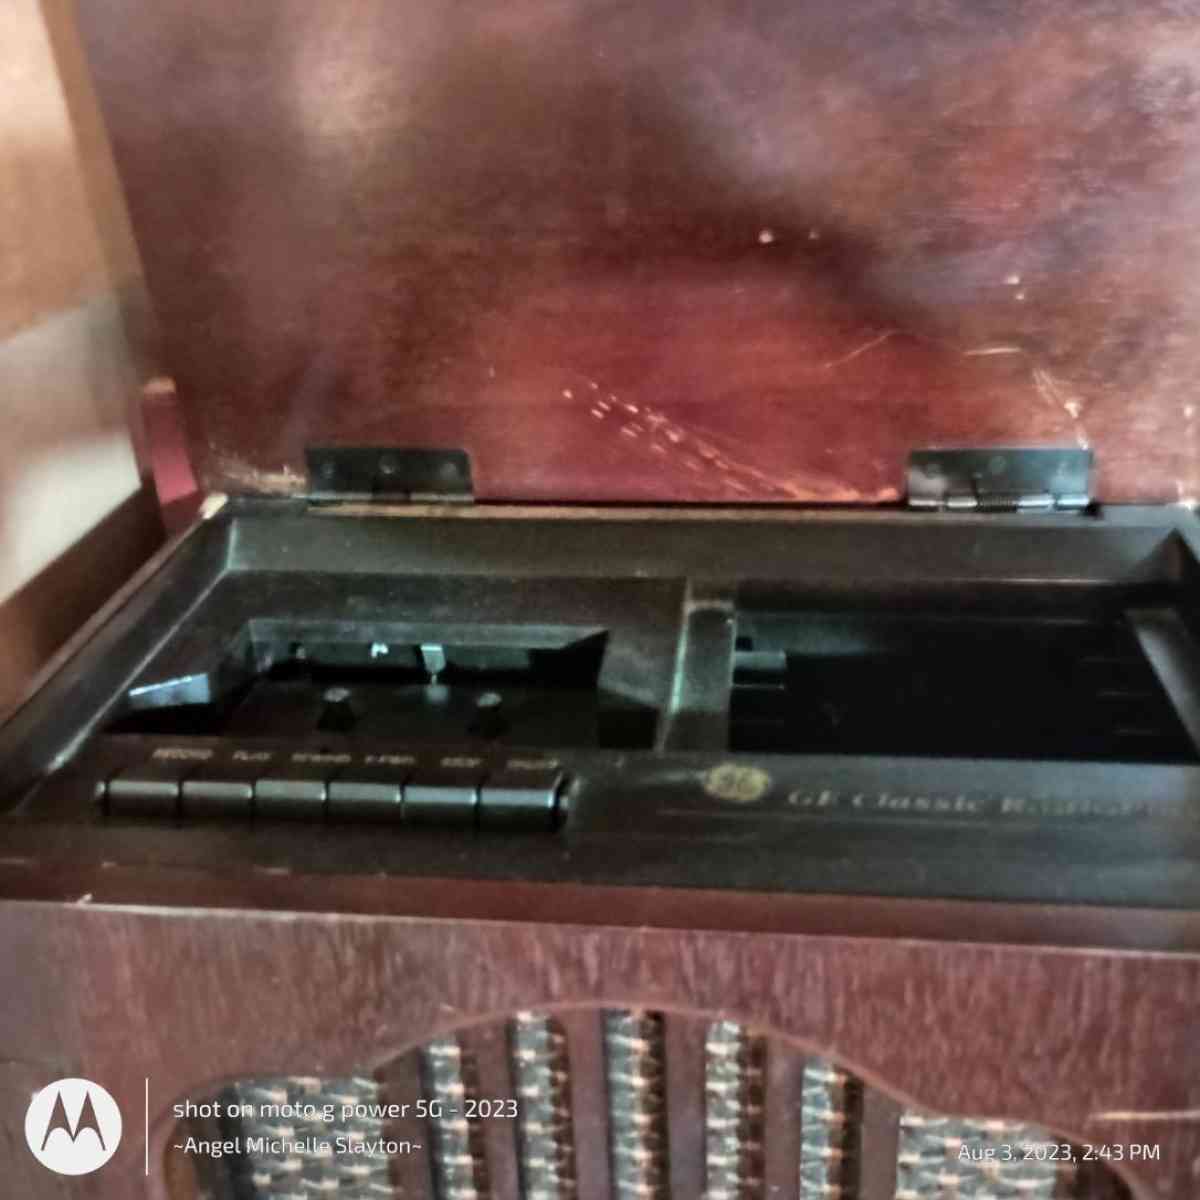 old radio from 70s works too